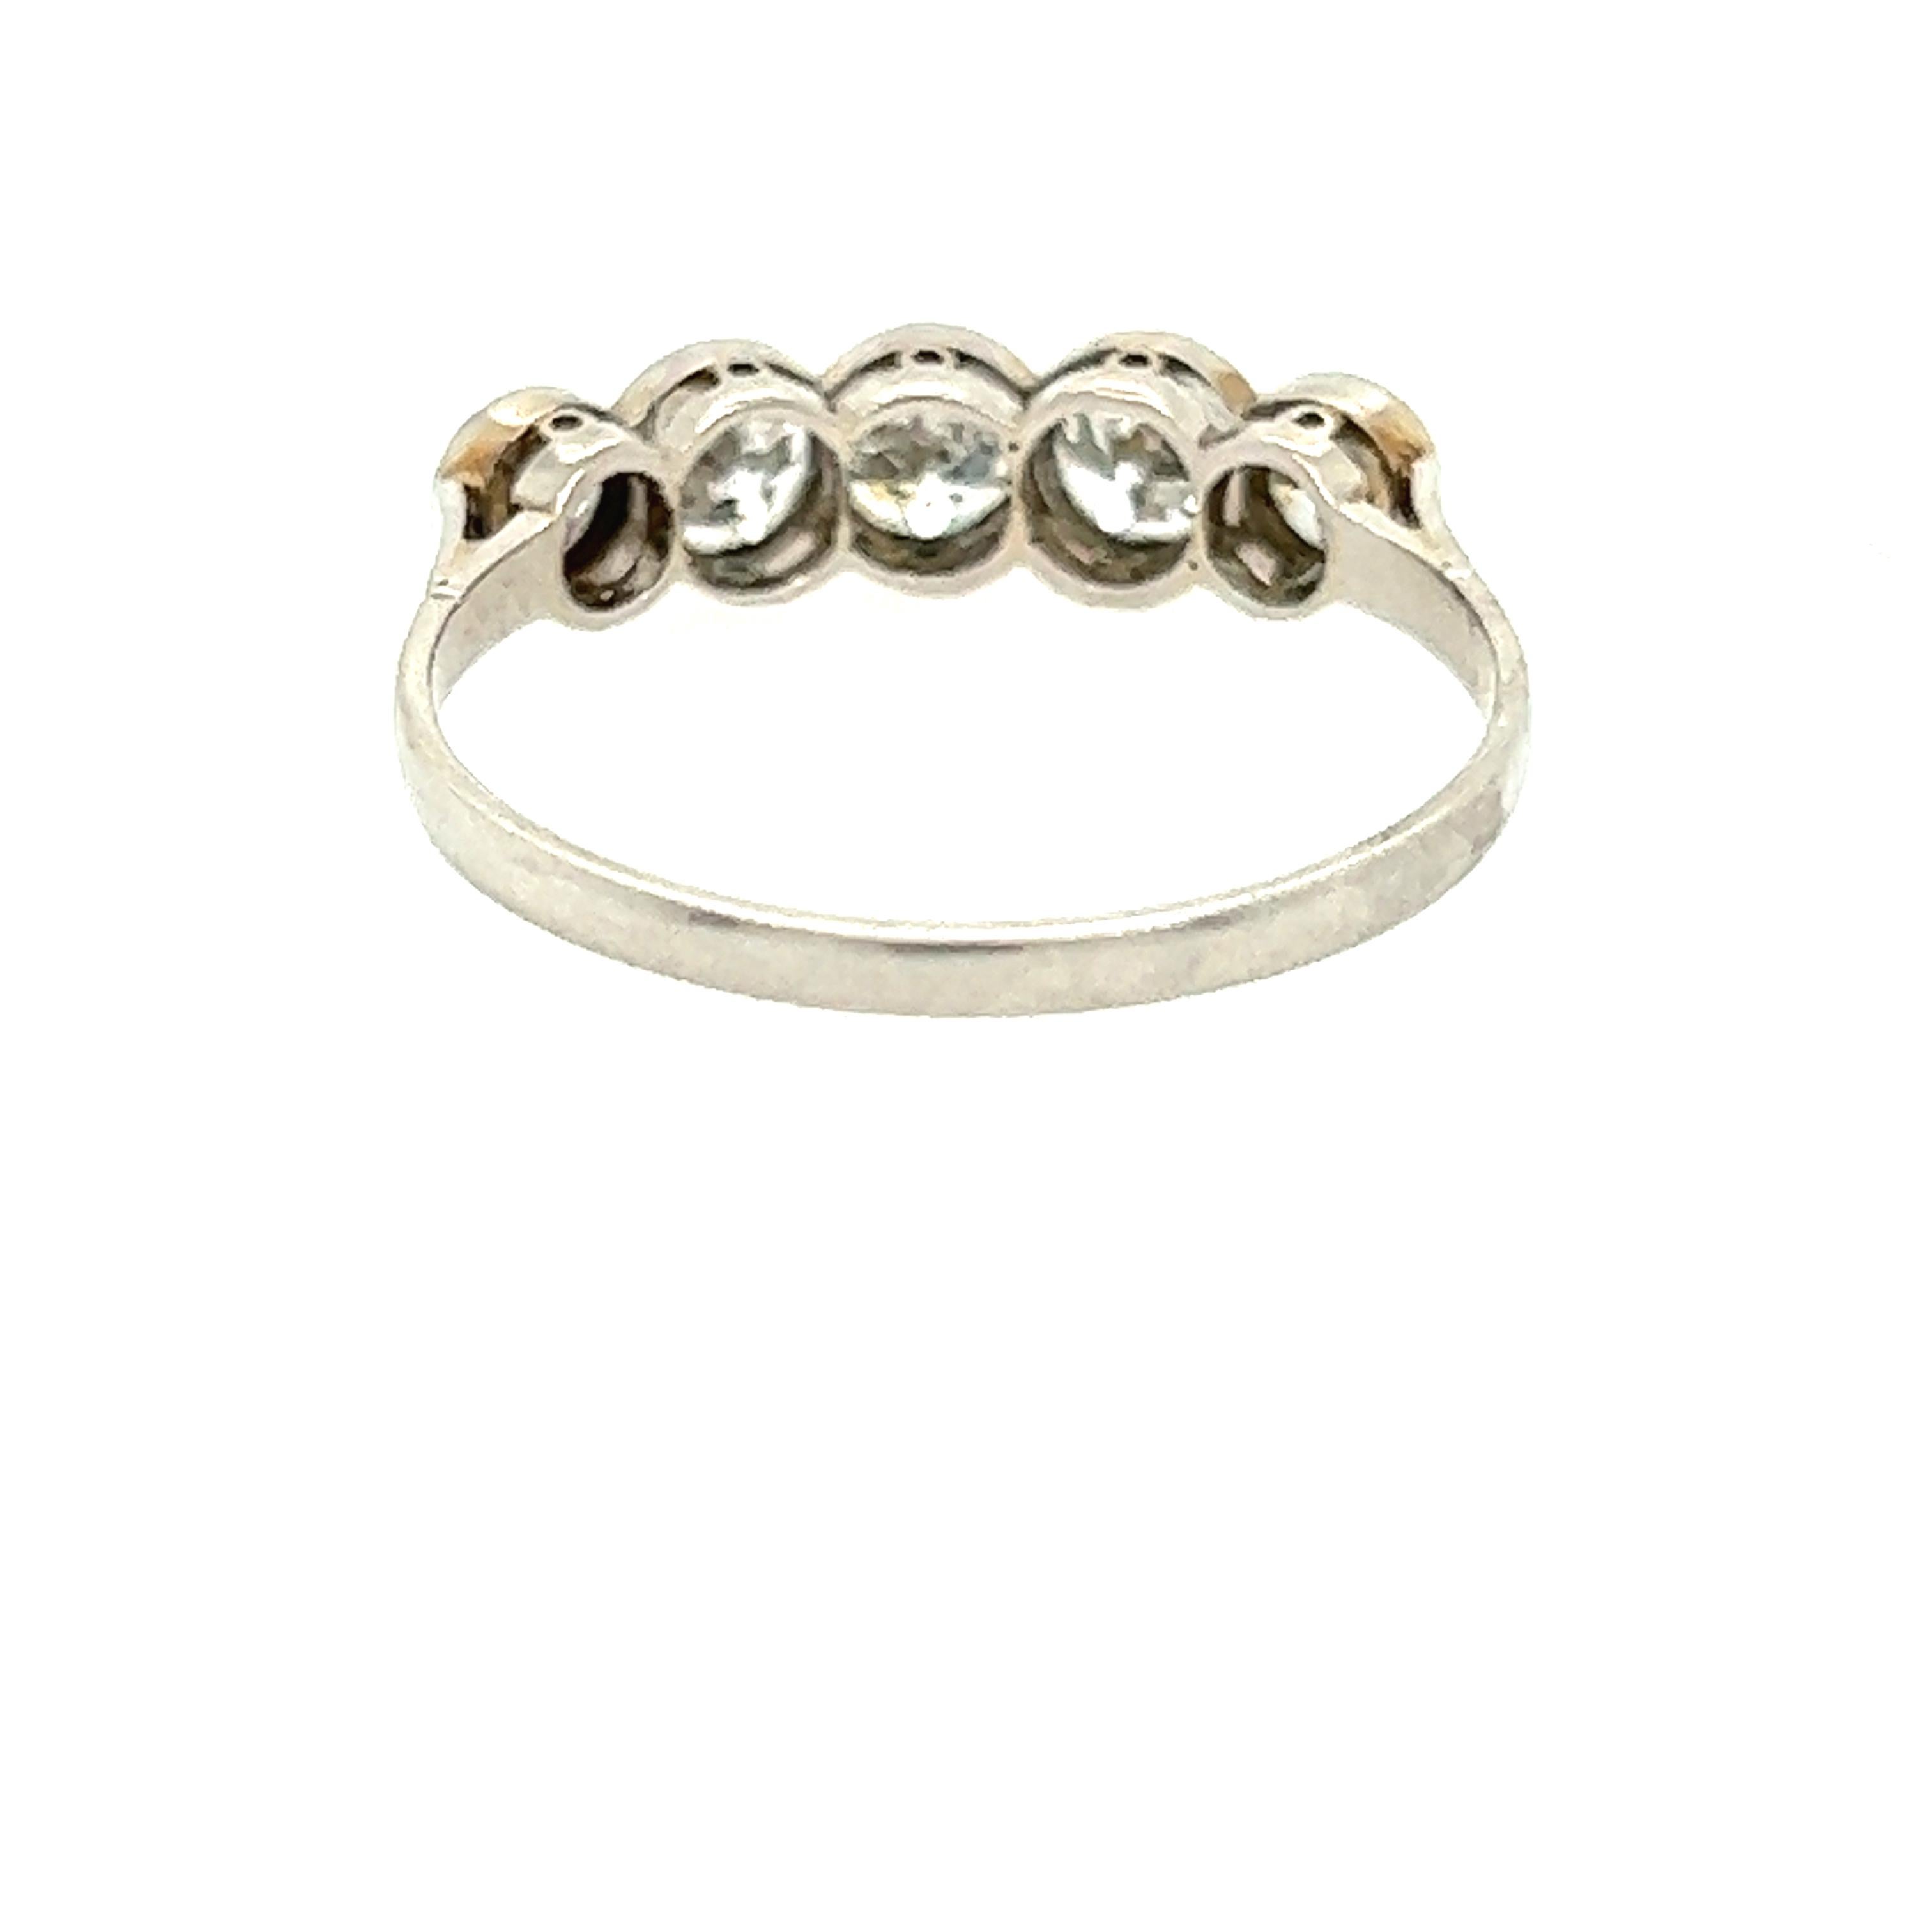 This exquisite antique diamond wedding band from the 1940s is a treasure from the Art Deco era. Crafted from lustrous platinum, this stunning ring features five sparkling diamonds across the top that weigh a total of 1.00 carats. This unique piece